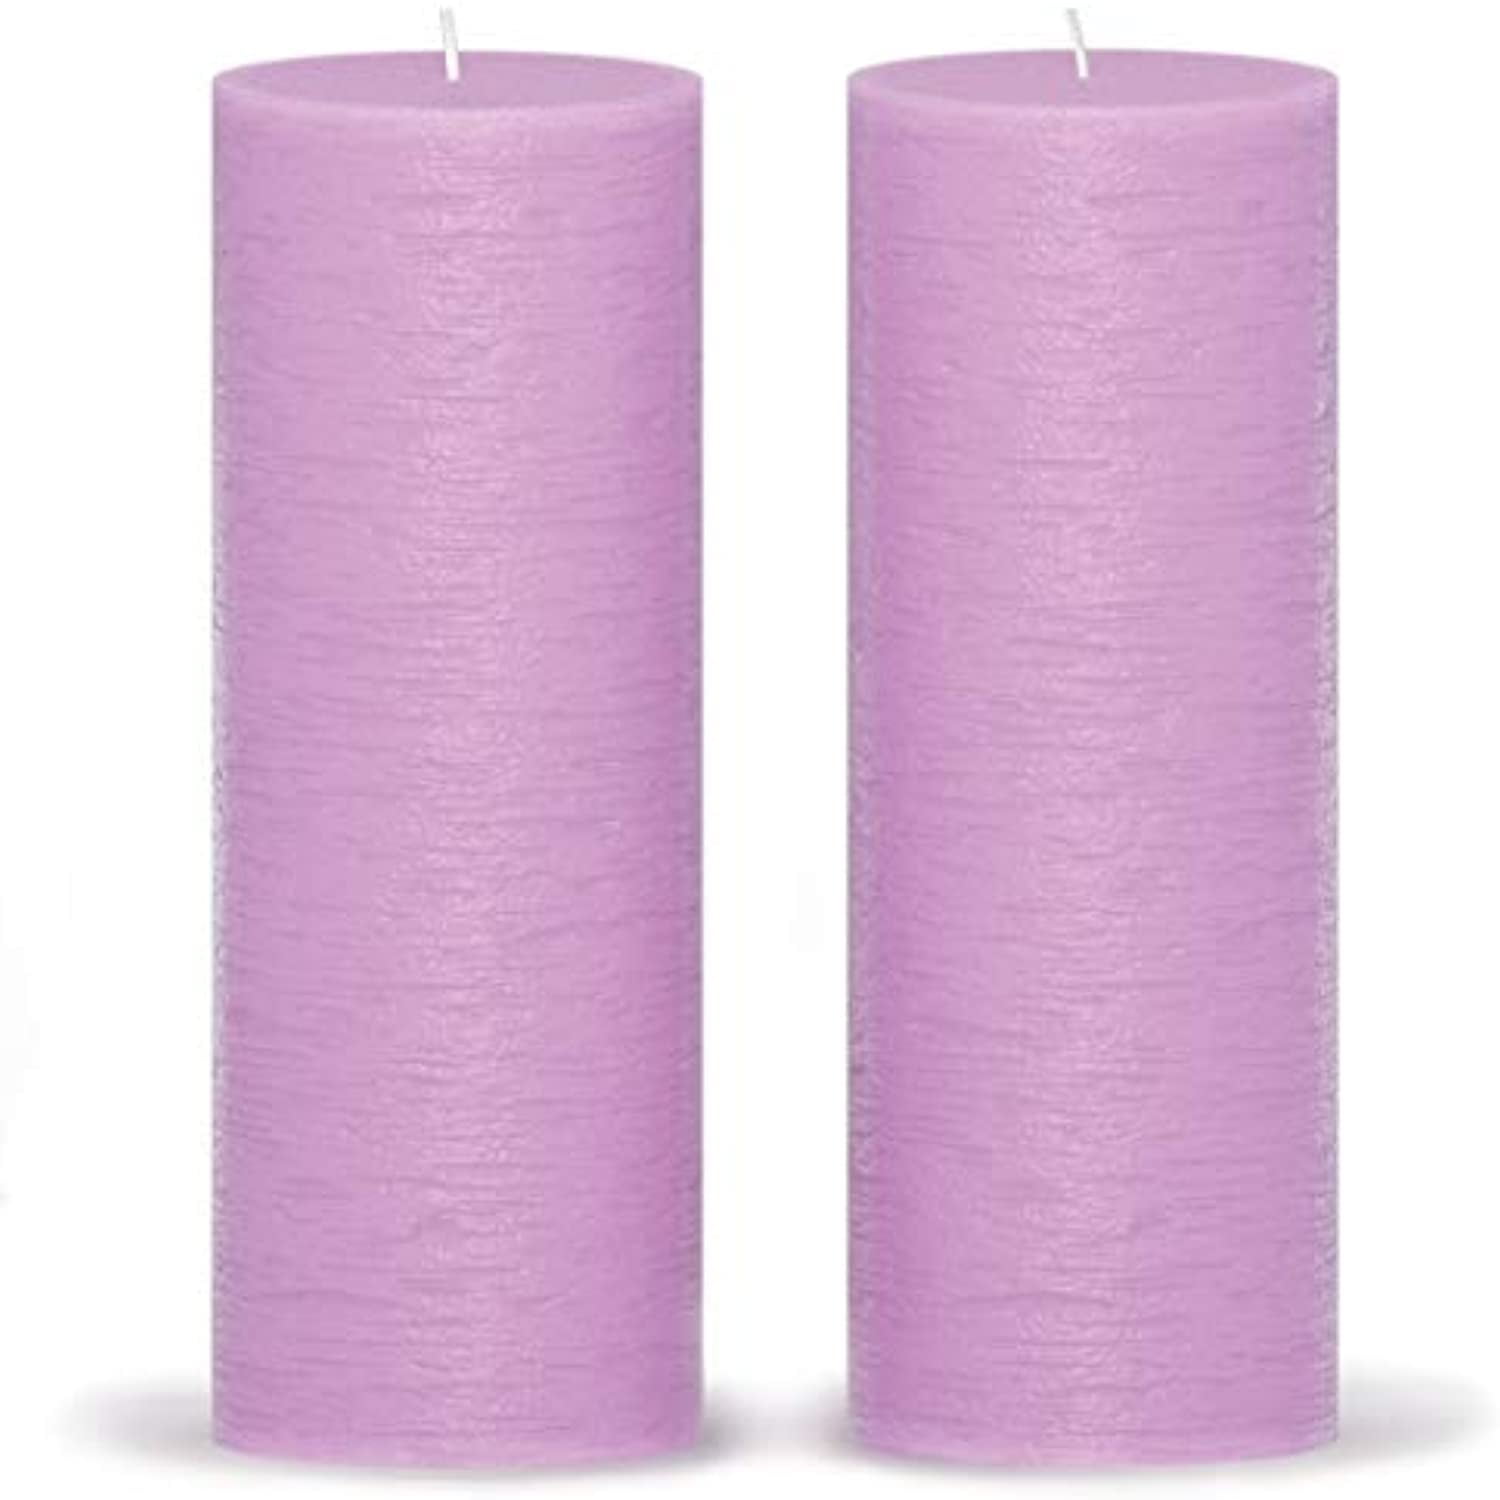 CANDWAX 3x8 Pillar Candle Set of 2 Decorative Candles Unscented No Drip Bordeaux 